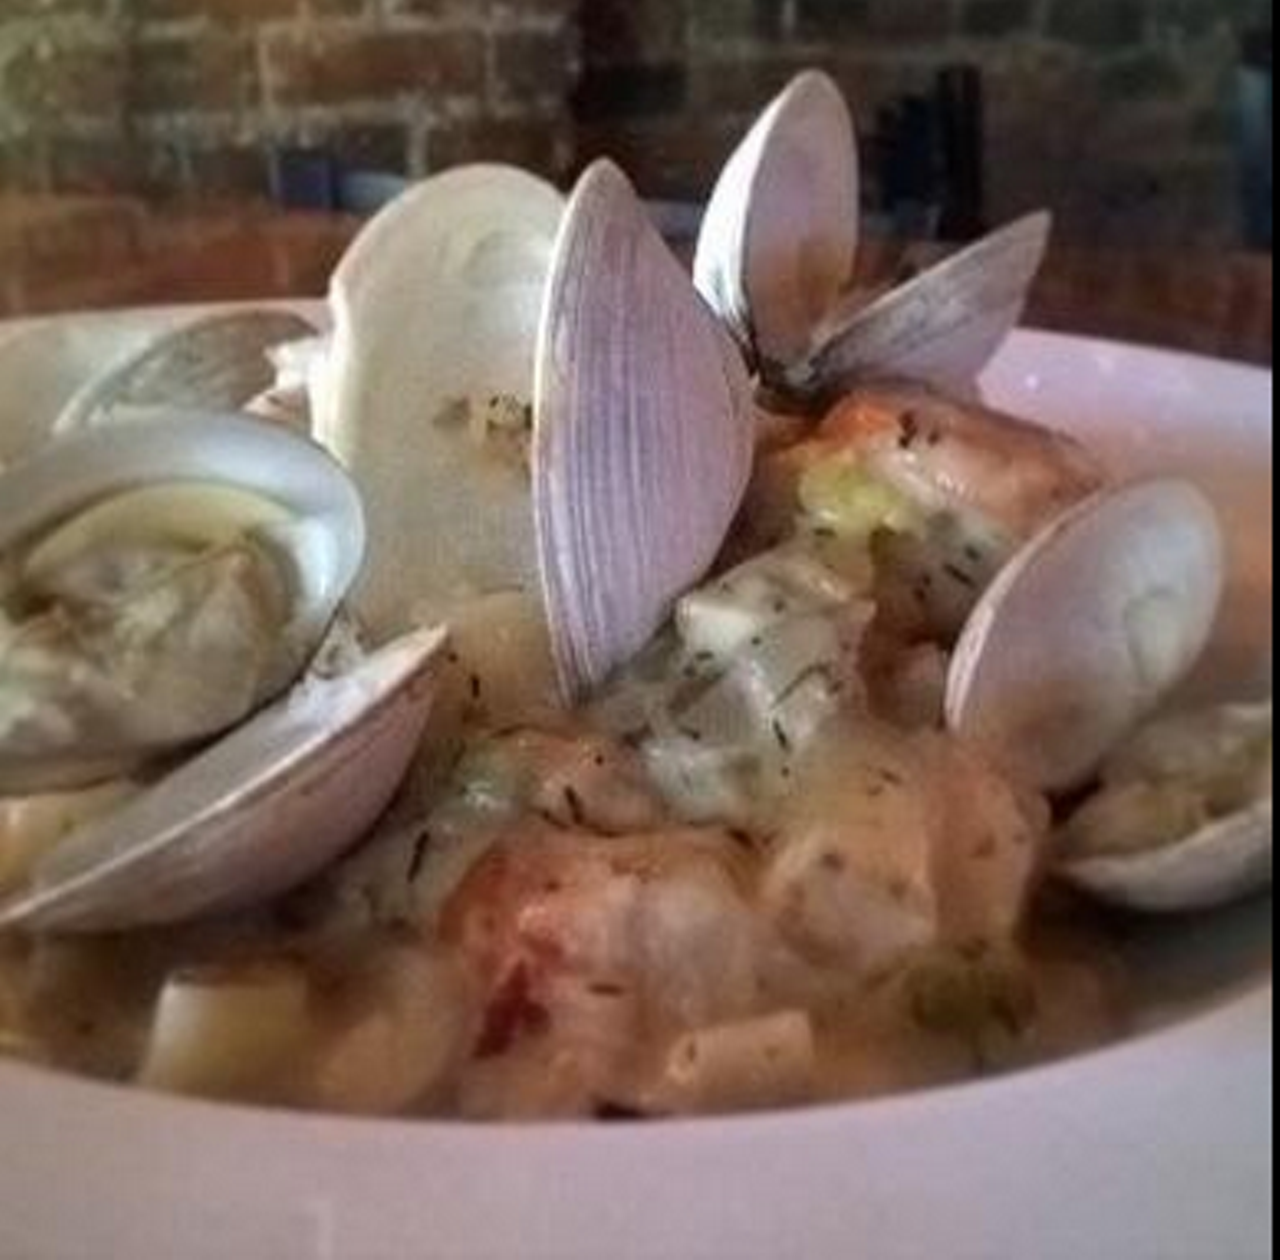 When: Sunday, Oct. 19, 10 a.m. – 5 p.m. (located in the lot next to The South Side) 
Menu: 1/2 chicken, 1 dozen clams, potatoes, coleslaw, corn, clam chowder and a roll. Extra clams are $9 per dozen. There will also be a cash bar with $2 beer specials.
Cost: $35 pre-sale and $40 day of event. 
Find the South Side at 2207 W. 11th Street, Tremont, (216) 937-2288